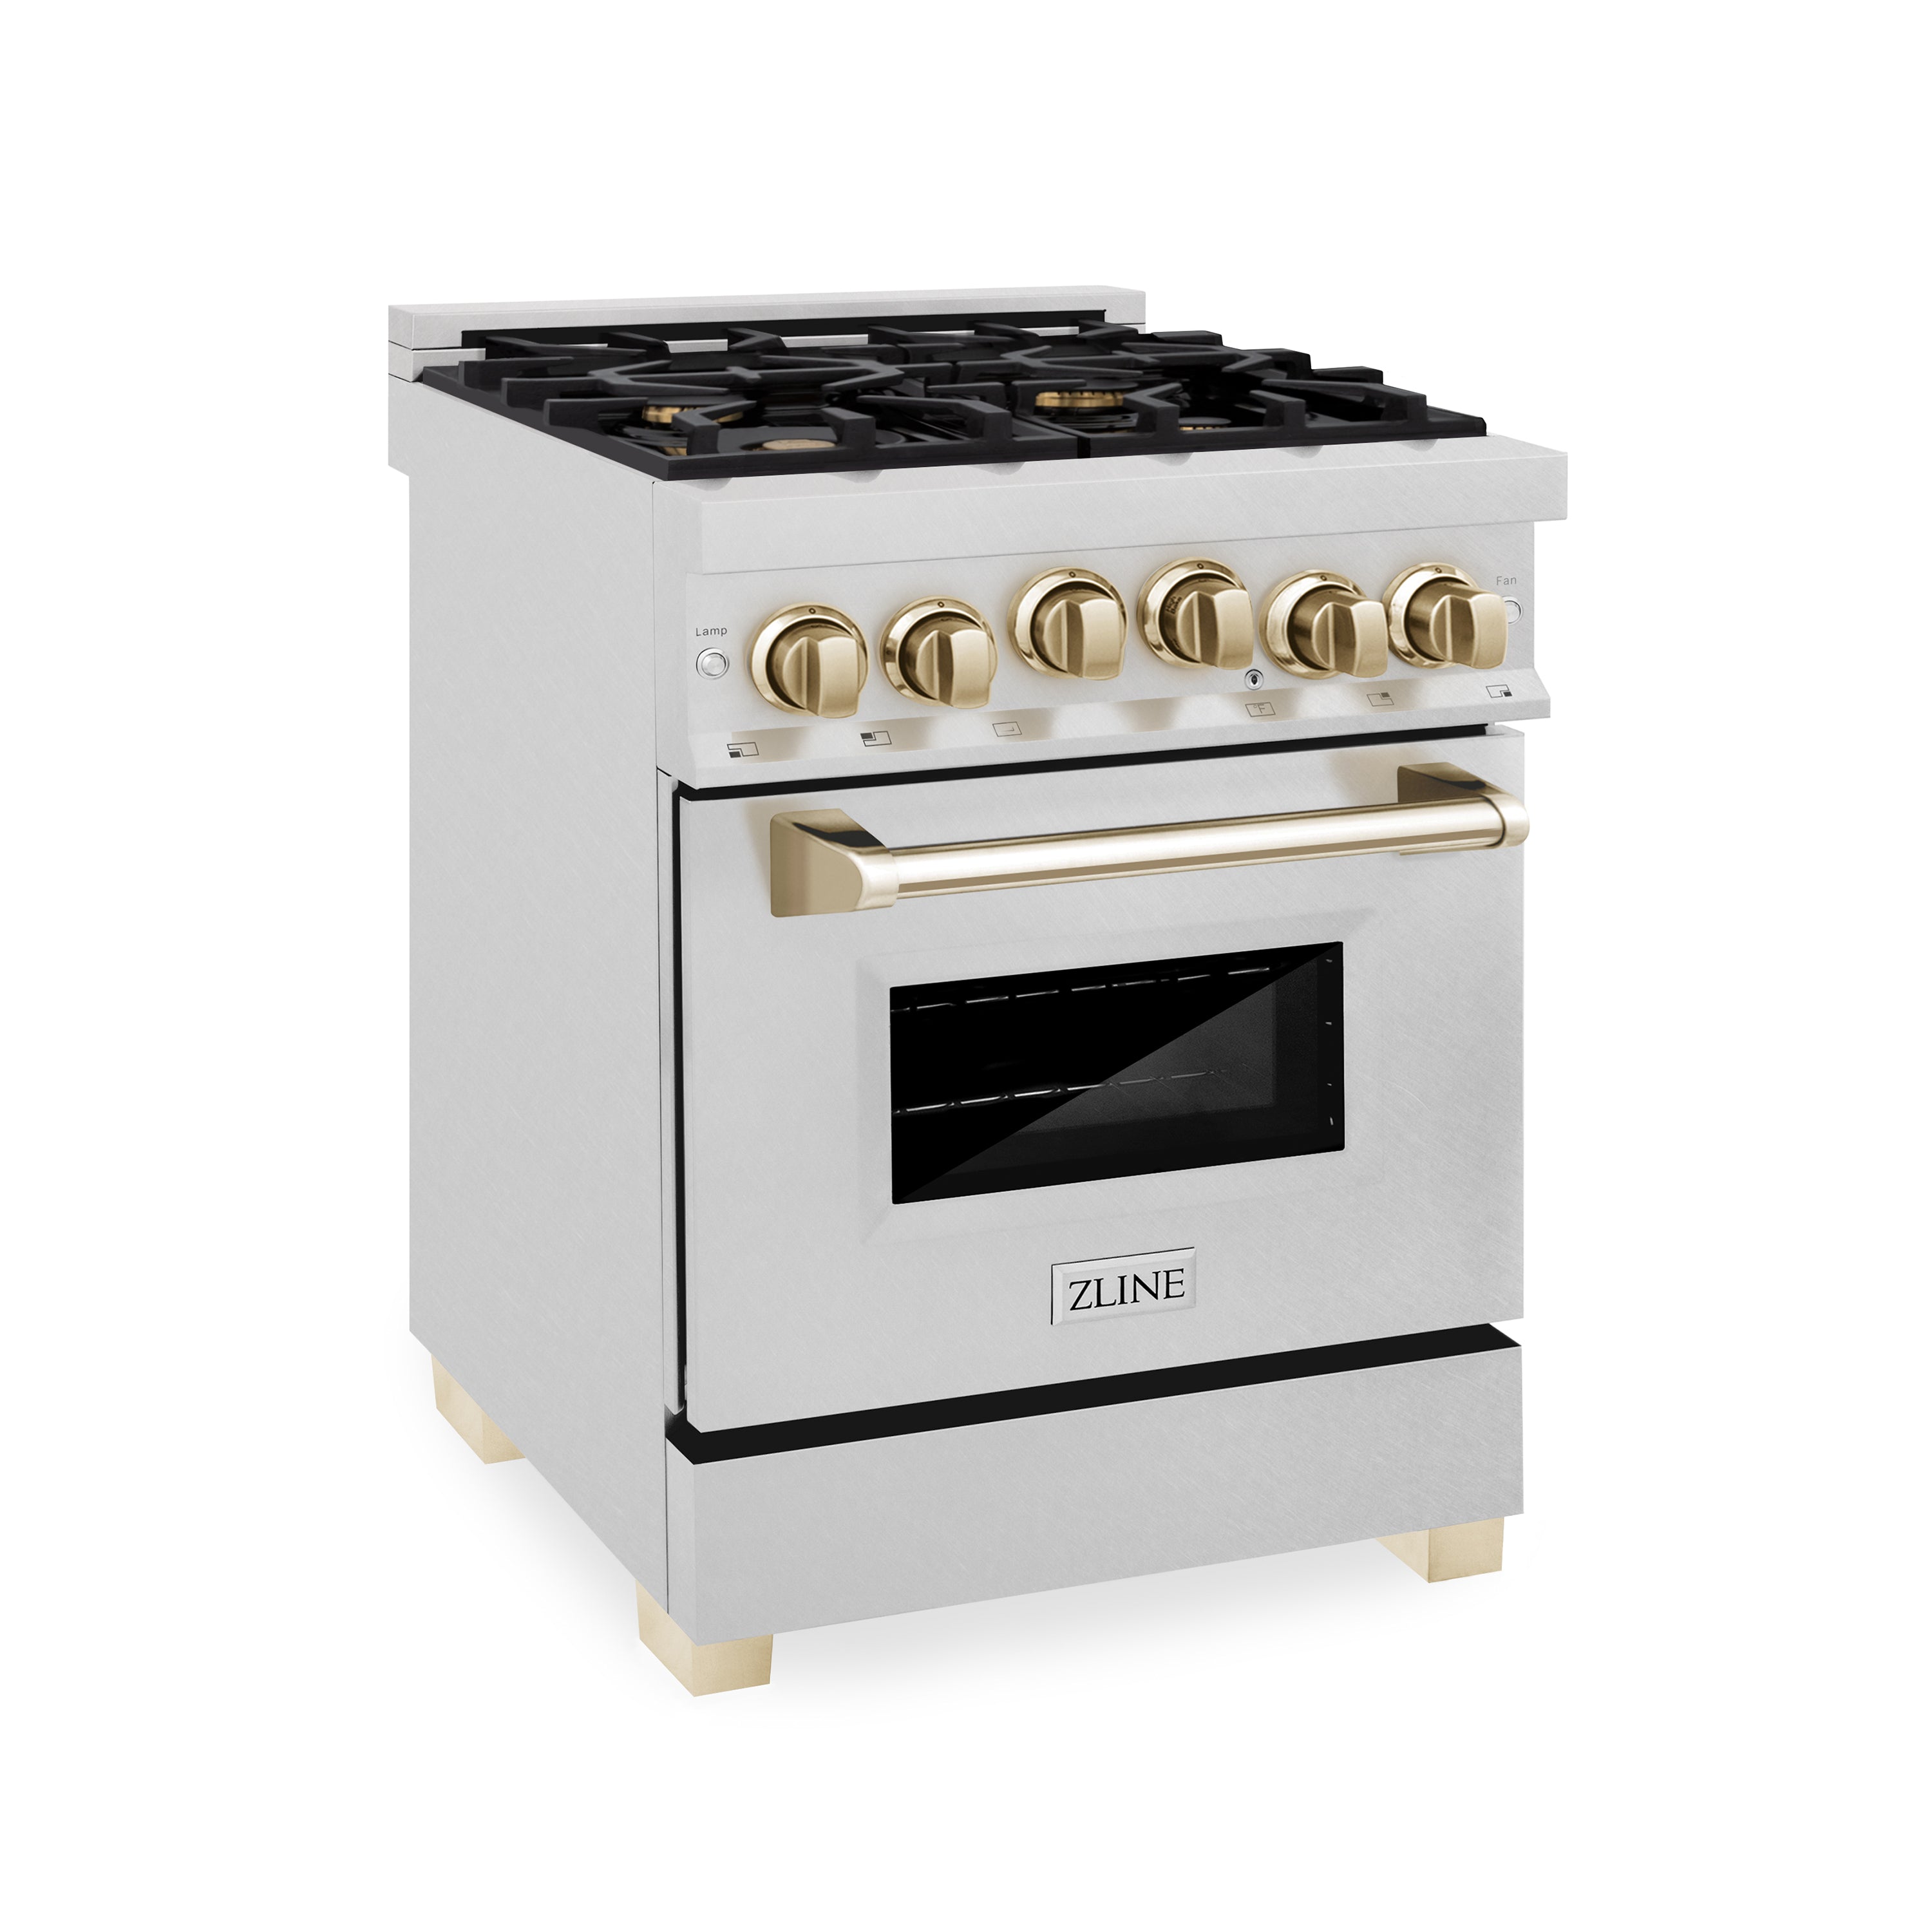 ZLINE Autograph Edition 24" 2.8 cu. ft. Range with Gas Stove and Gas Oven in Fingerprint Resistant Stainless Steel with Polished Gold Accents (RGSZ-SN-24-G)